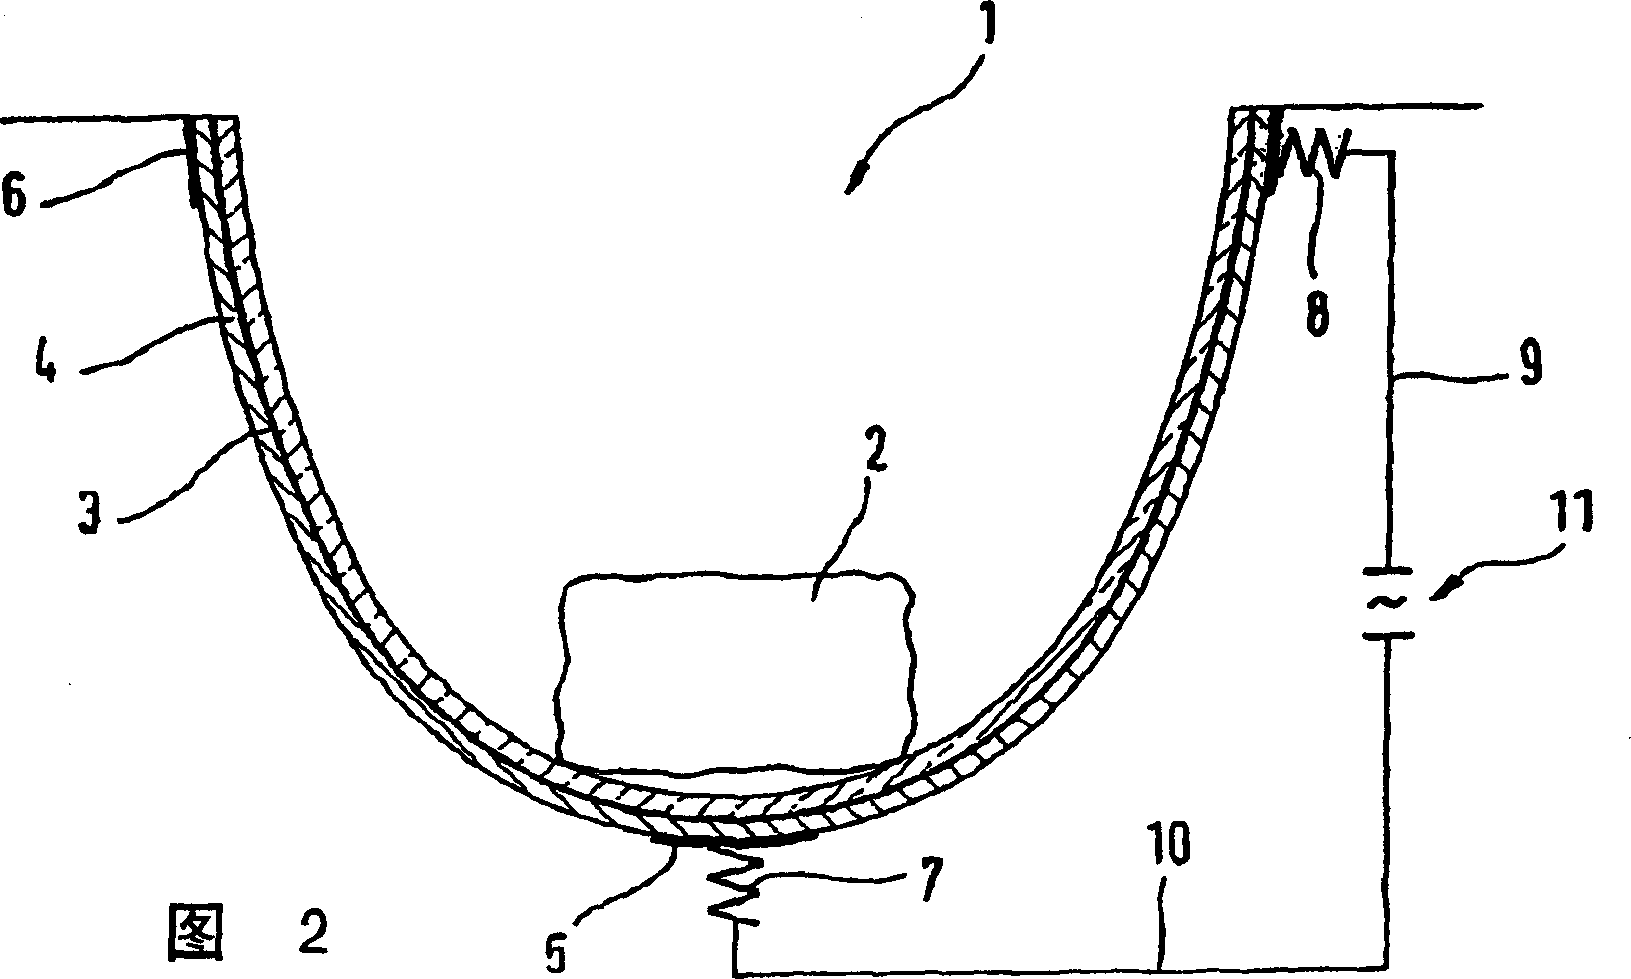 Cooking device comprising non-planar, multi-dimensionally configured cooking surface composed of glass or glass ceramic